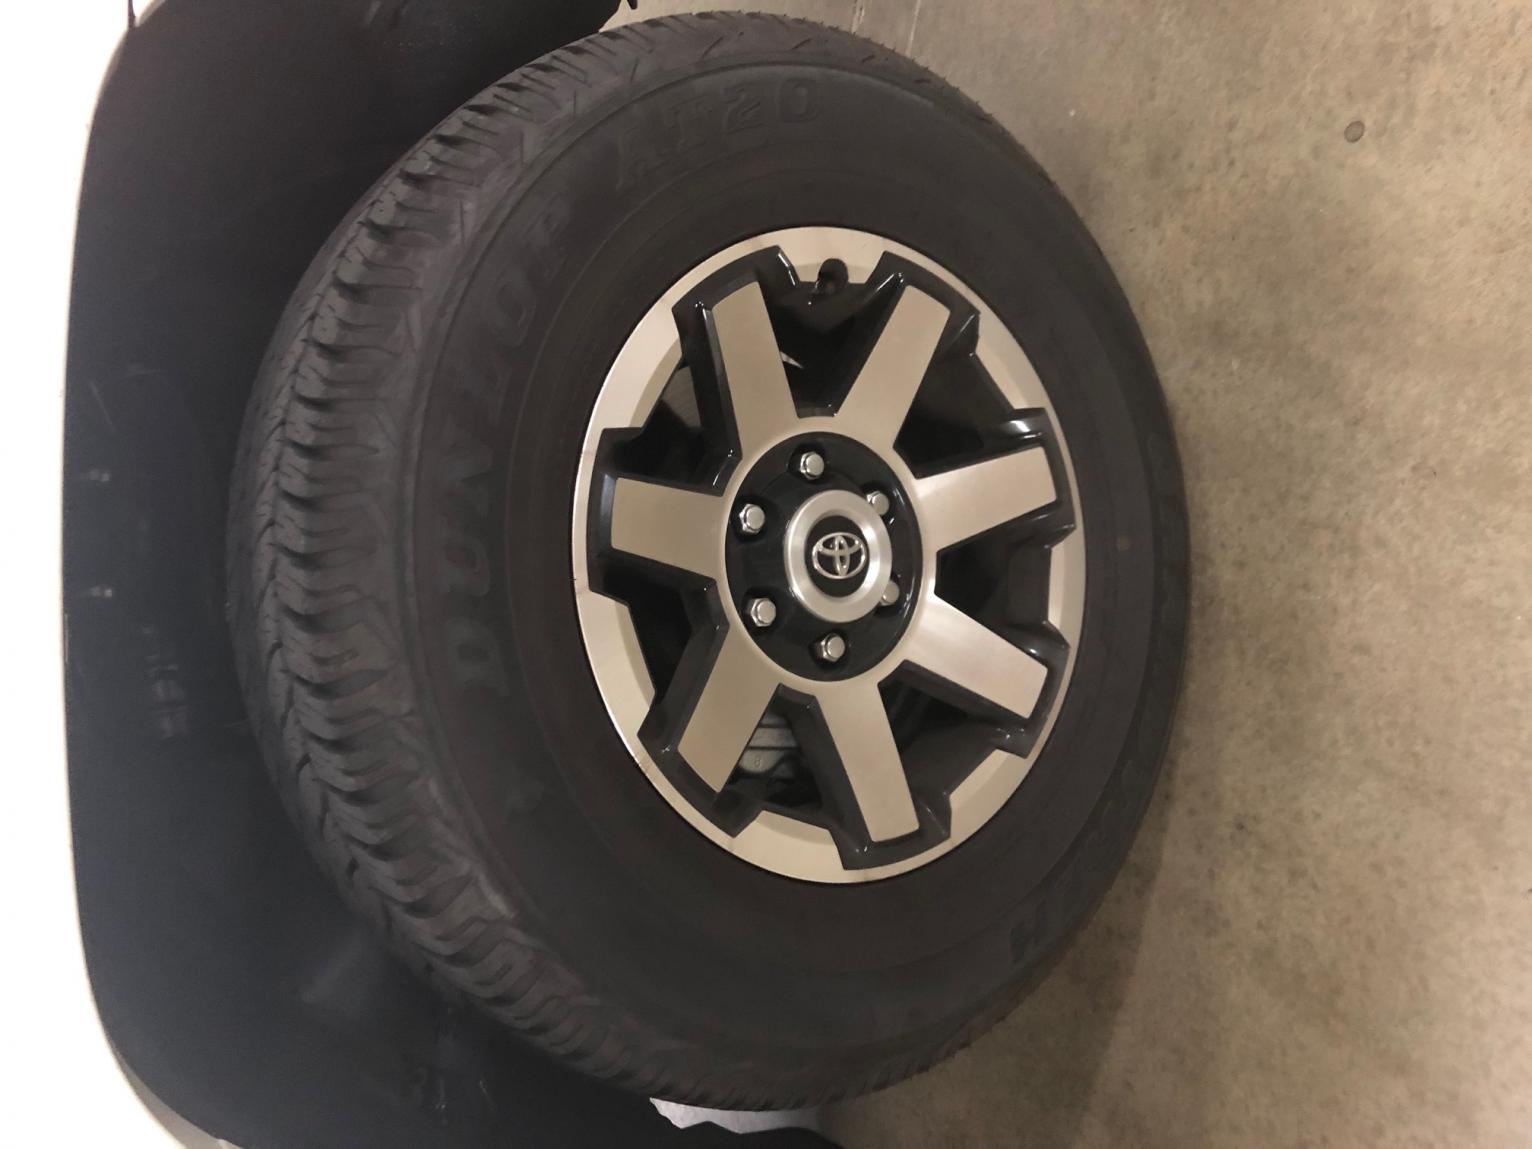 For Sale: 2019 TRD Off Road Premium Wheels and Tires - 0 (Chicago, IL)-img_1962-jpg